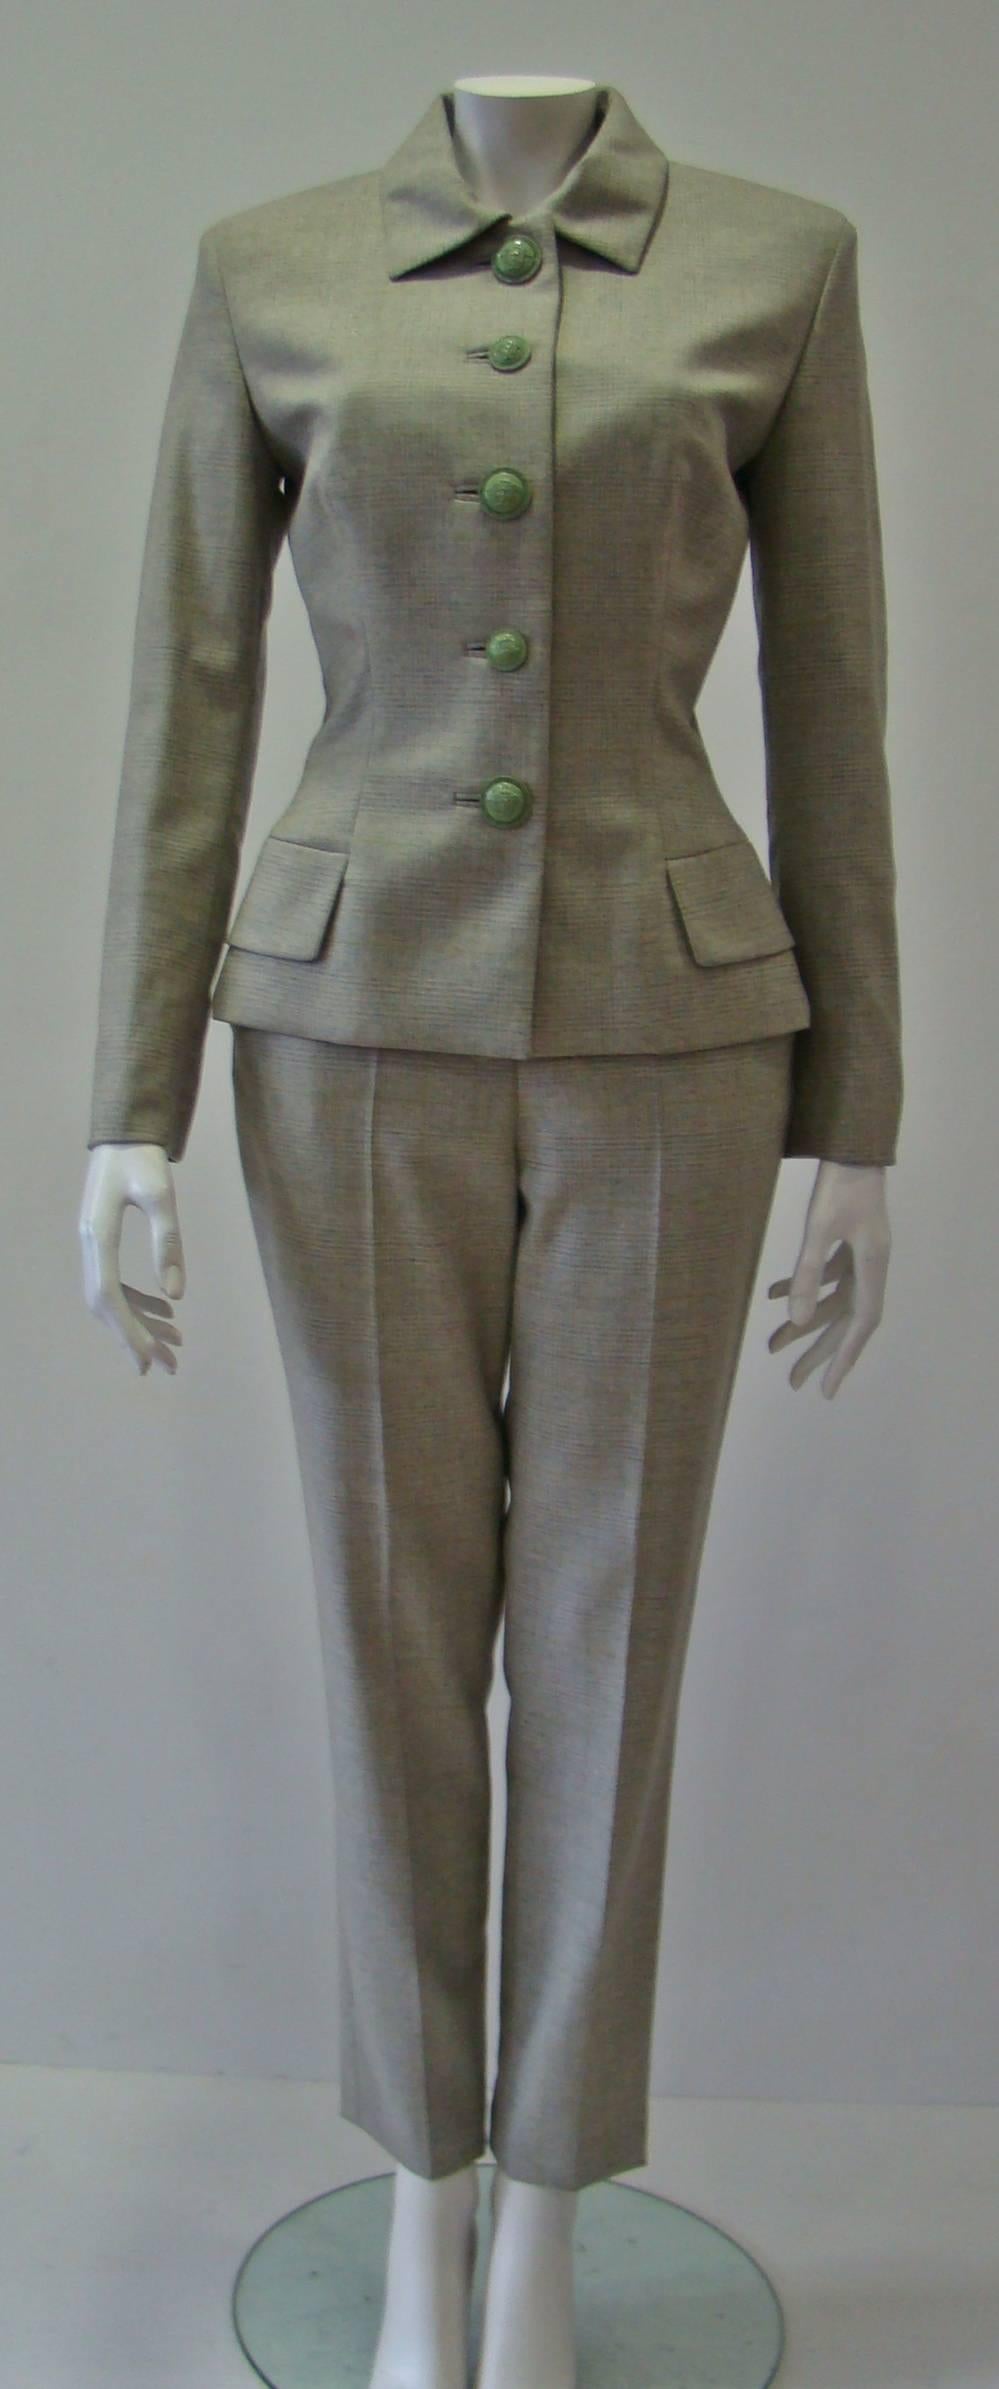 Gianni Versace Mint Green Prens De Gal Pants Suit. 100%Wool Jacket Featuring A Normal Collar, Two Front Flap Pockets, Green Medusa Front Buttoning, And Two Unfuctional Buttons At Cuffs. Combined With Trousers Featuring Two Welt Pockets, Back Zip